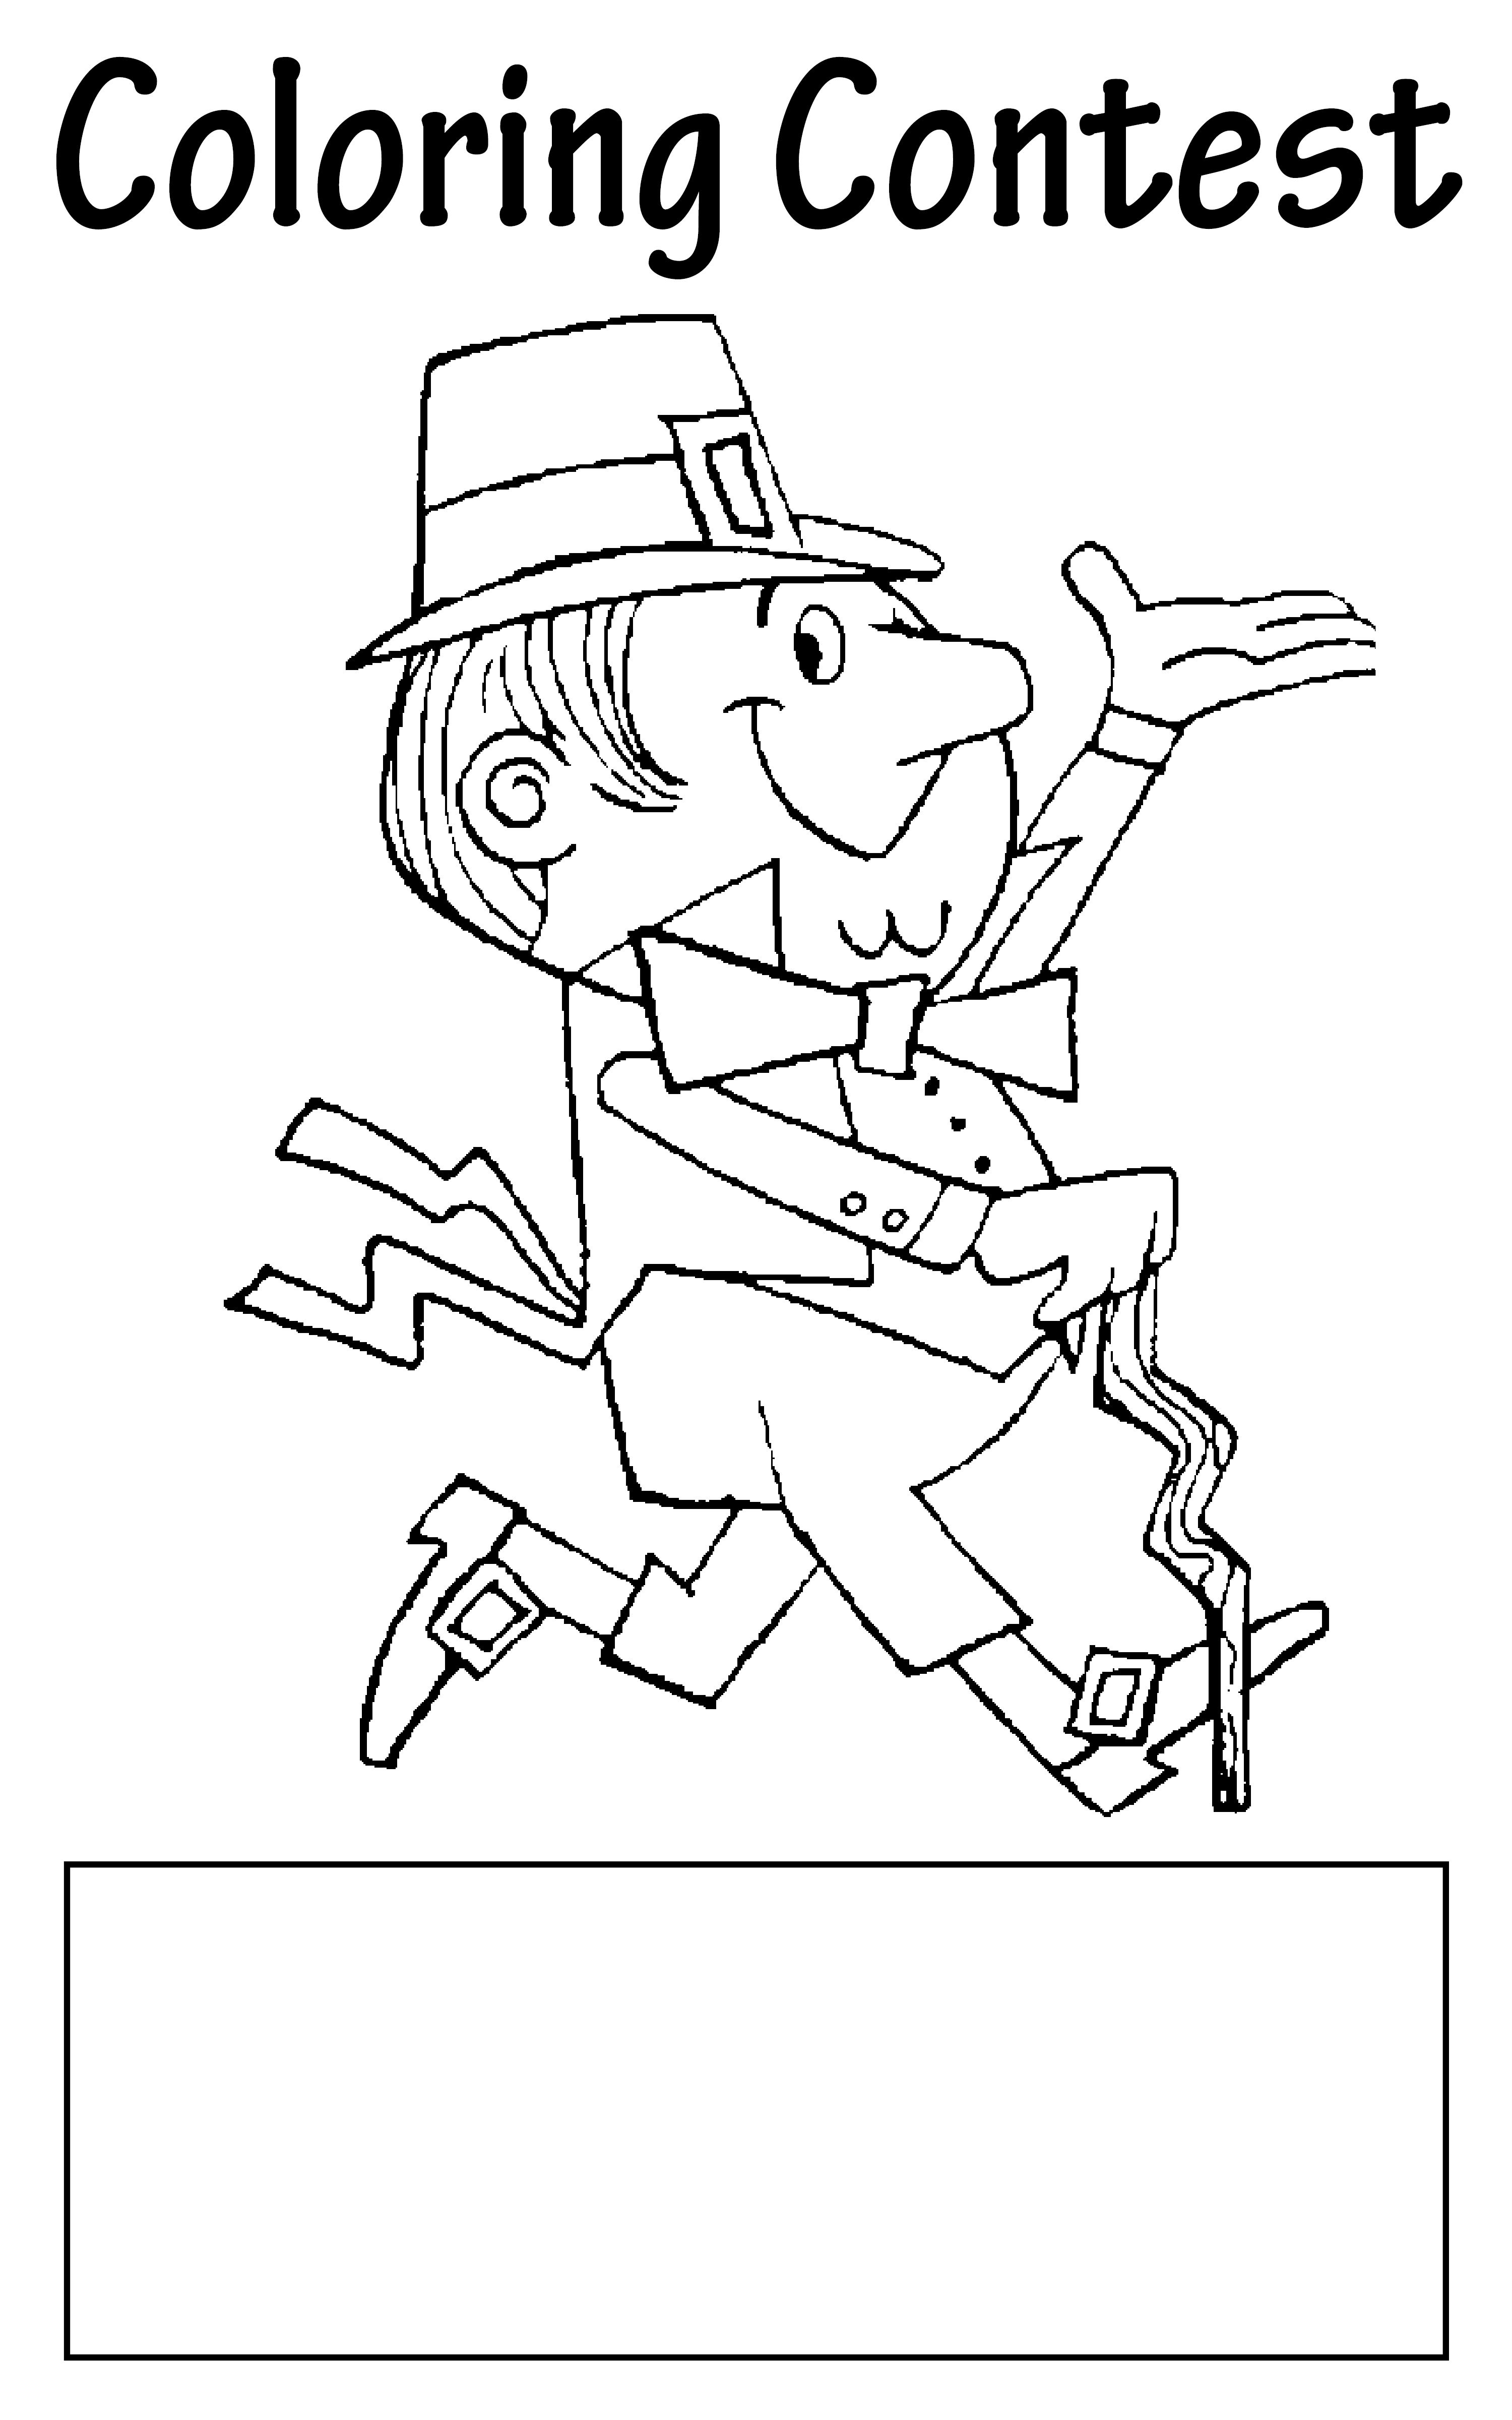 Coloring Pages | SchoolPrinting.com